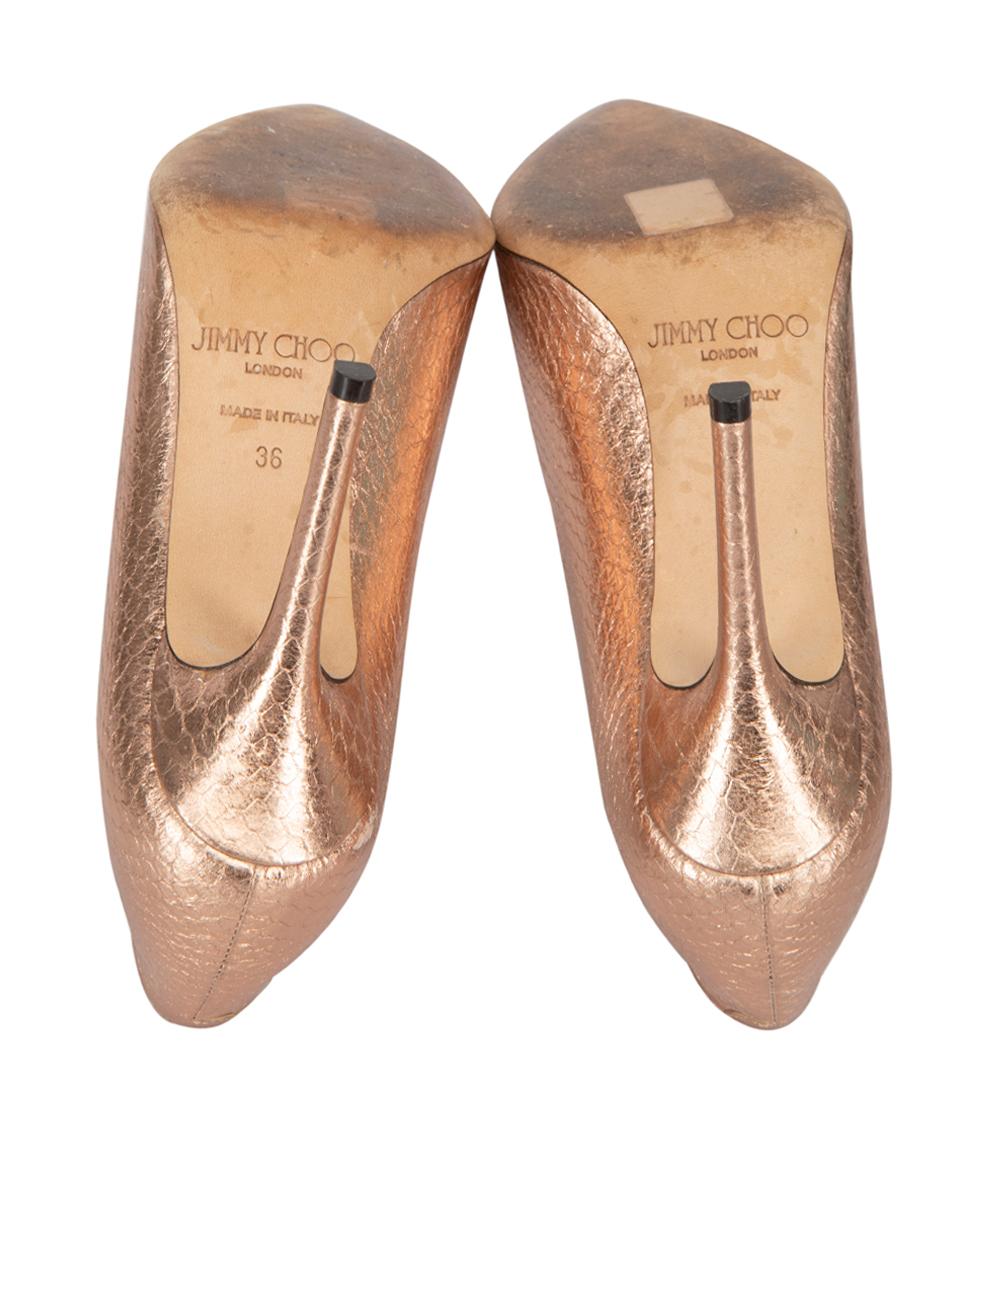 Jimmy Choo Women's Bronze Embossed Leather Pointed Toe Pumps 1